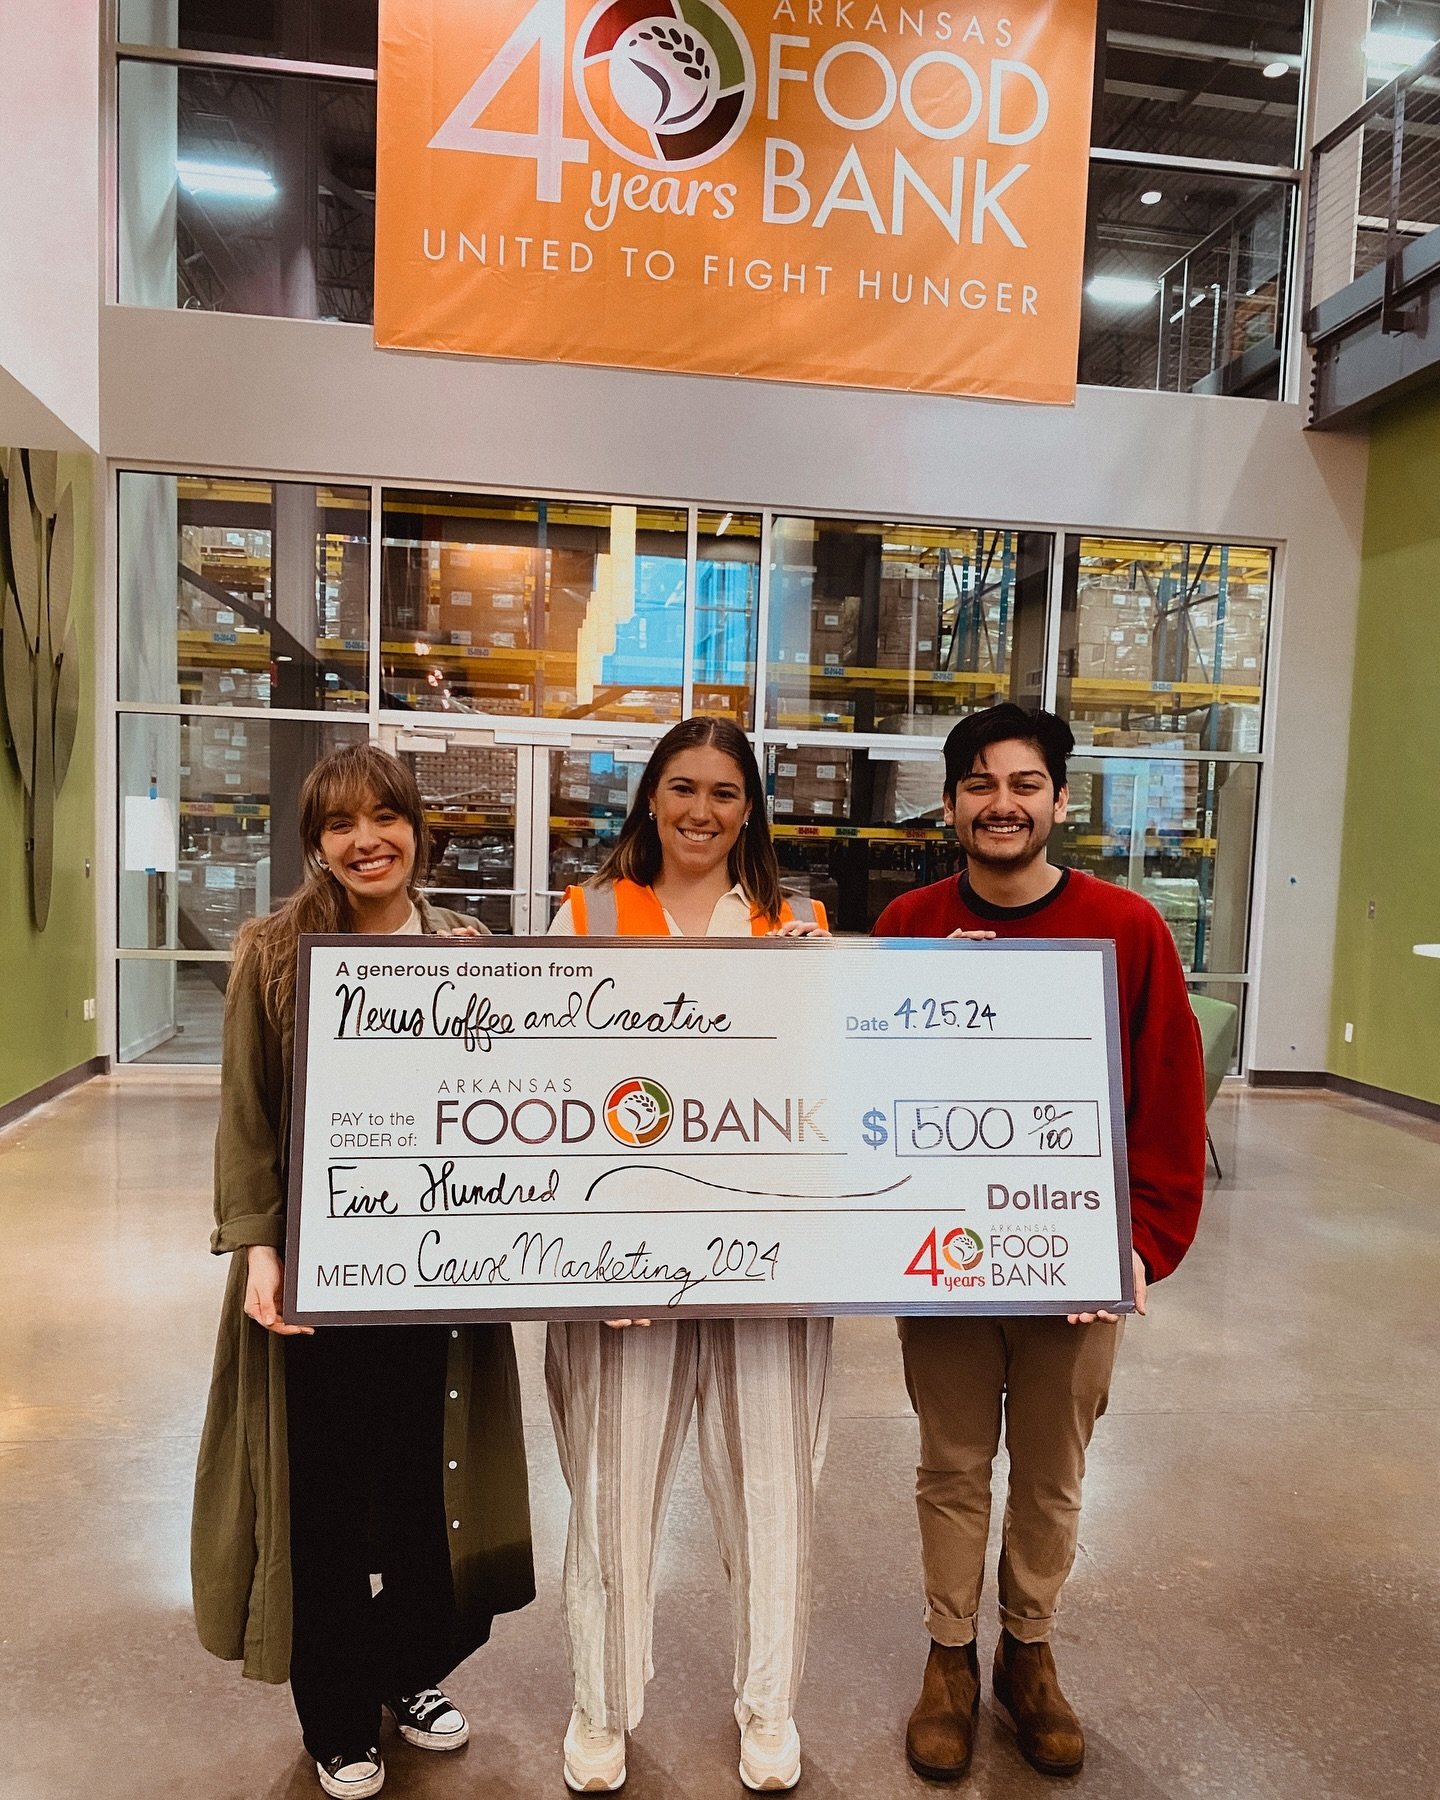 From January to March of this year, we partnered with @arfoodbank as part of our newly founded Collective Foundation to give back to our community! Thanks to your purchase of our Lighthouse Espresso whole bean coffee bags, we were able to donate $500